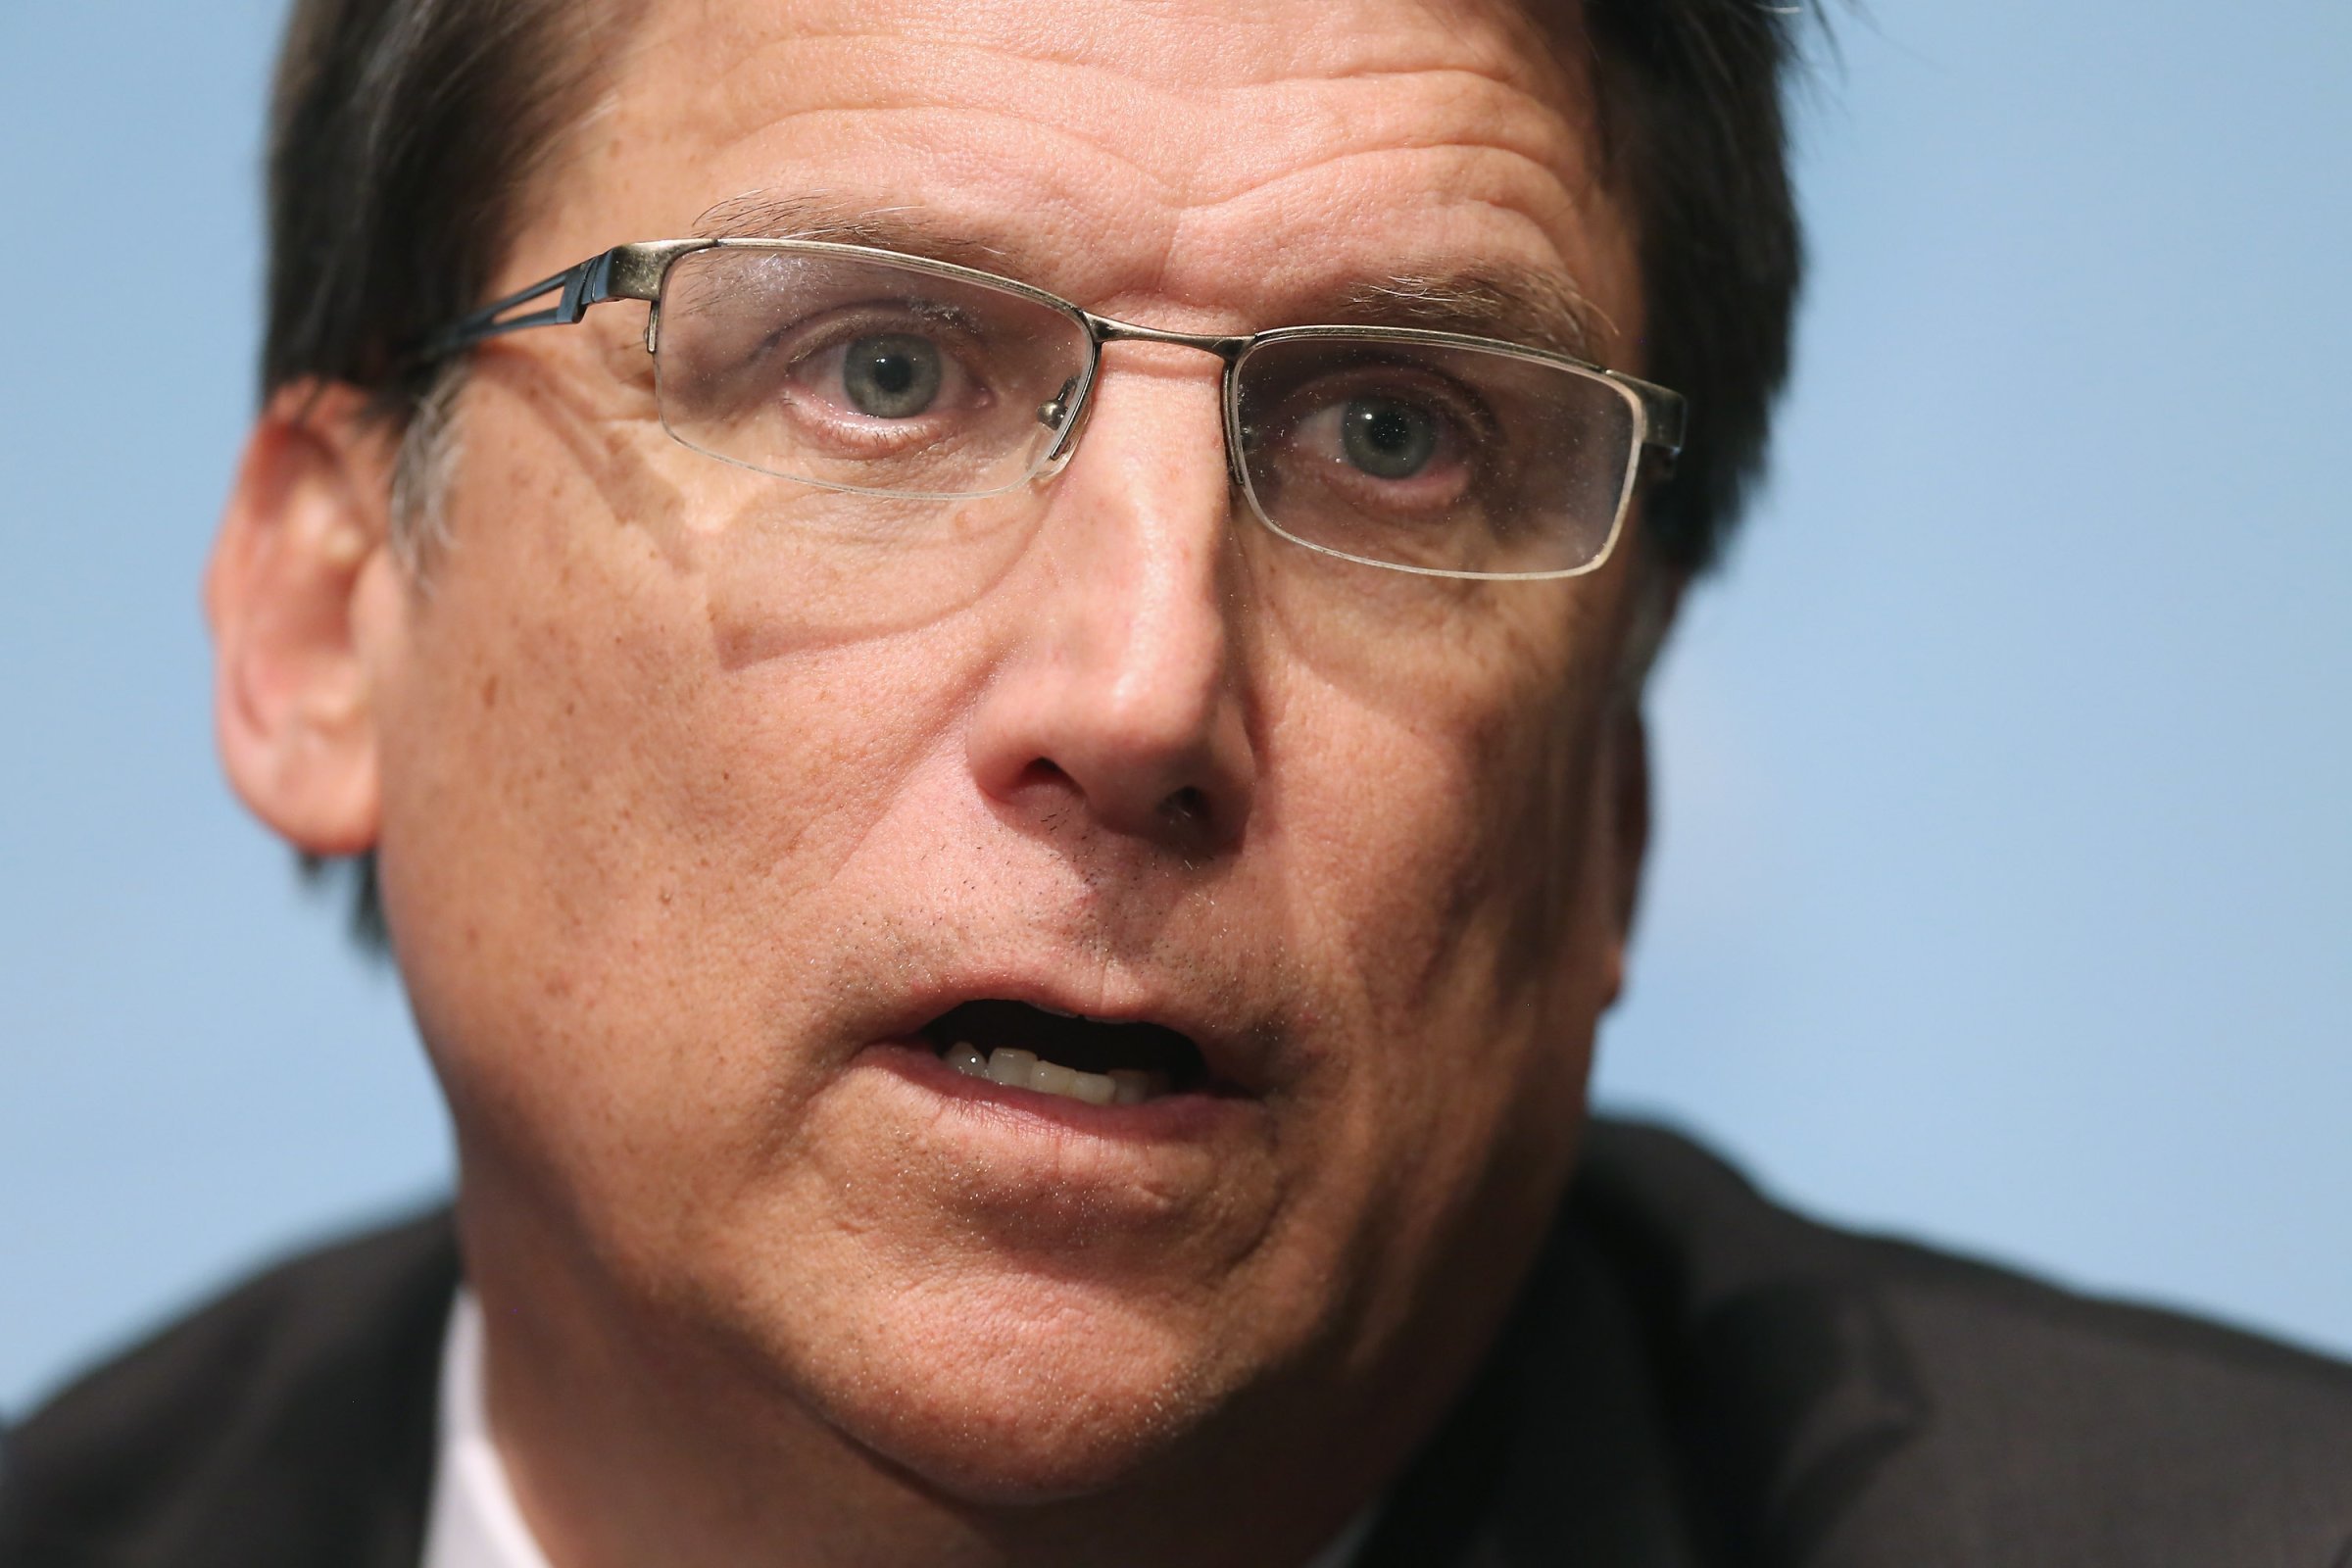 North Carolina Governor Pat McCrory holds a news conference with fellow members of the Republican Governors Association at the U.S. Chamber of Commerce in Washington, D.C., on Feb. 23, 2015.